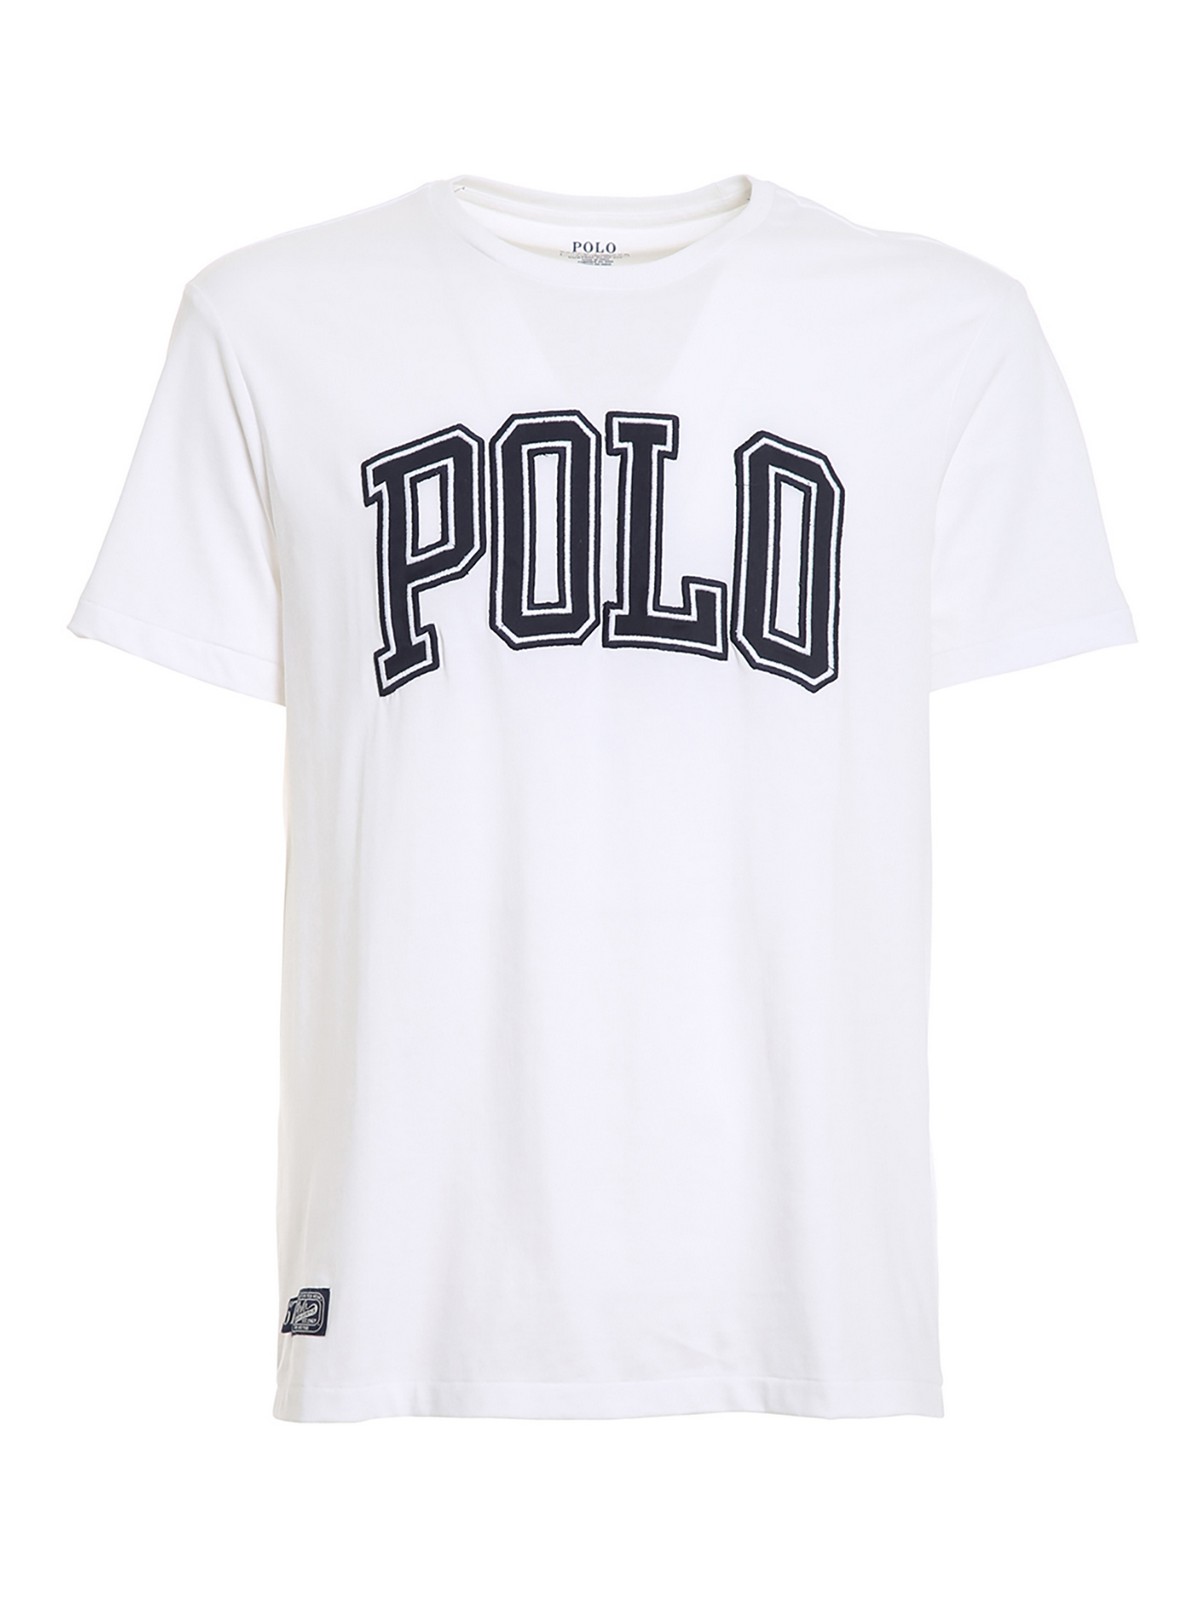 T-shirts Polo Ralph Lauren - Polo college embroidery T-shirt - 710840424002